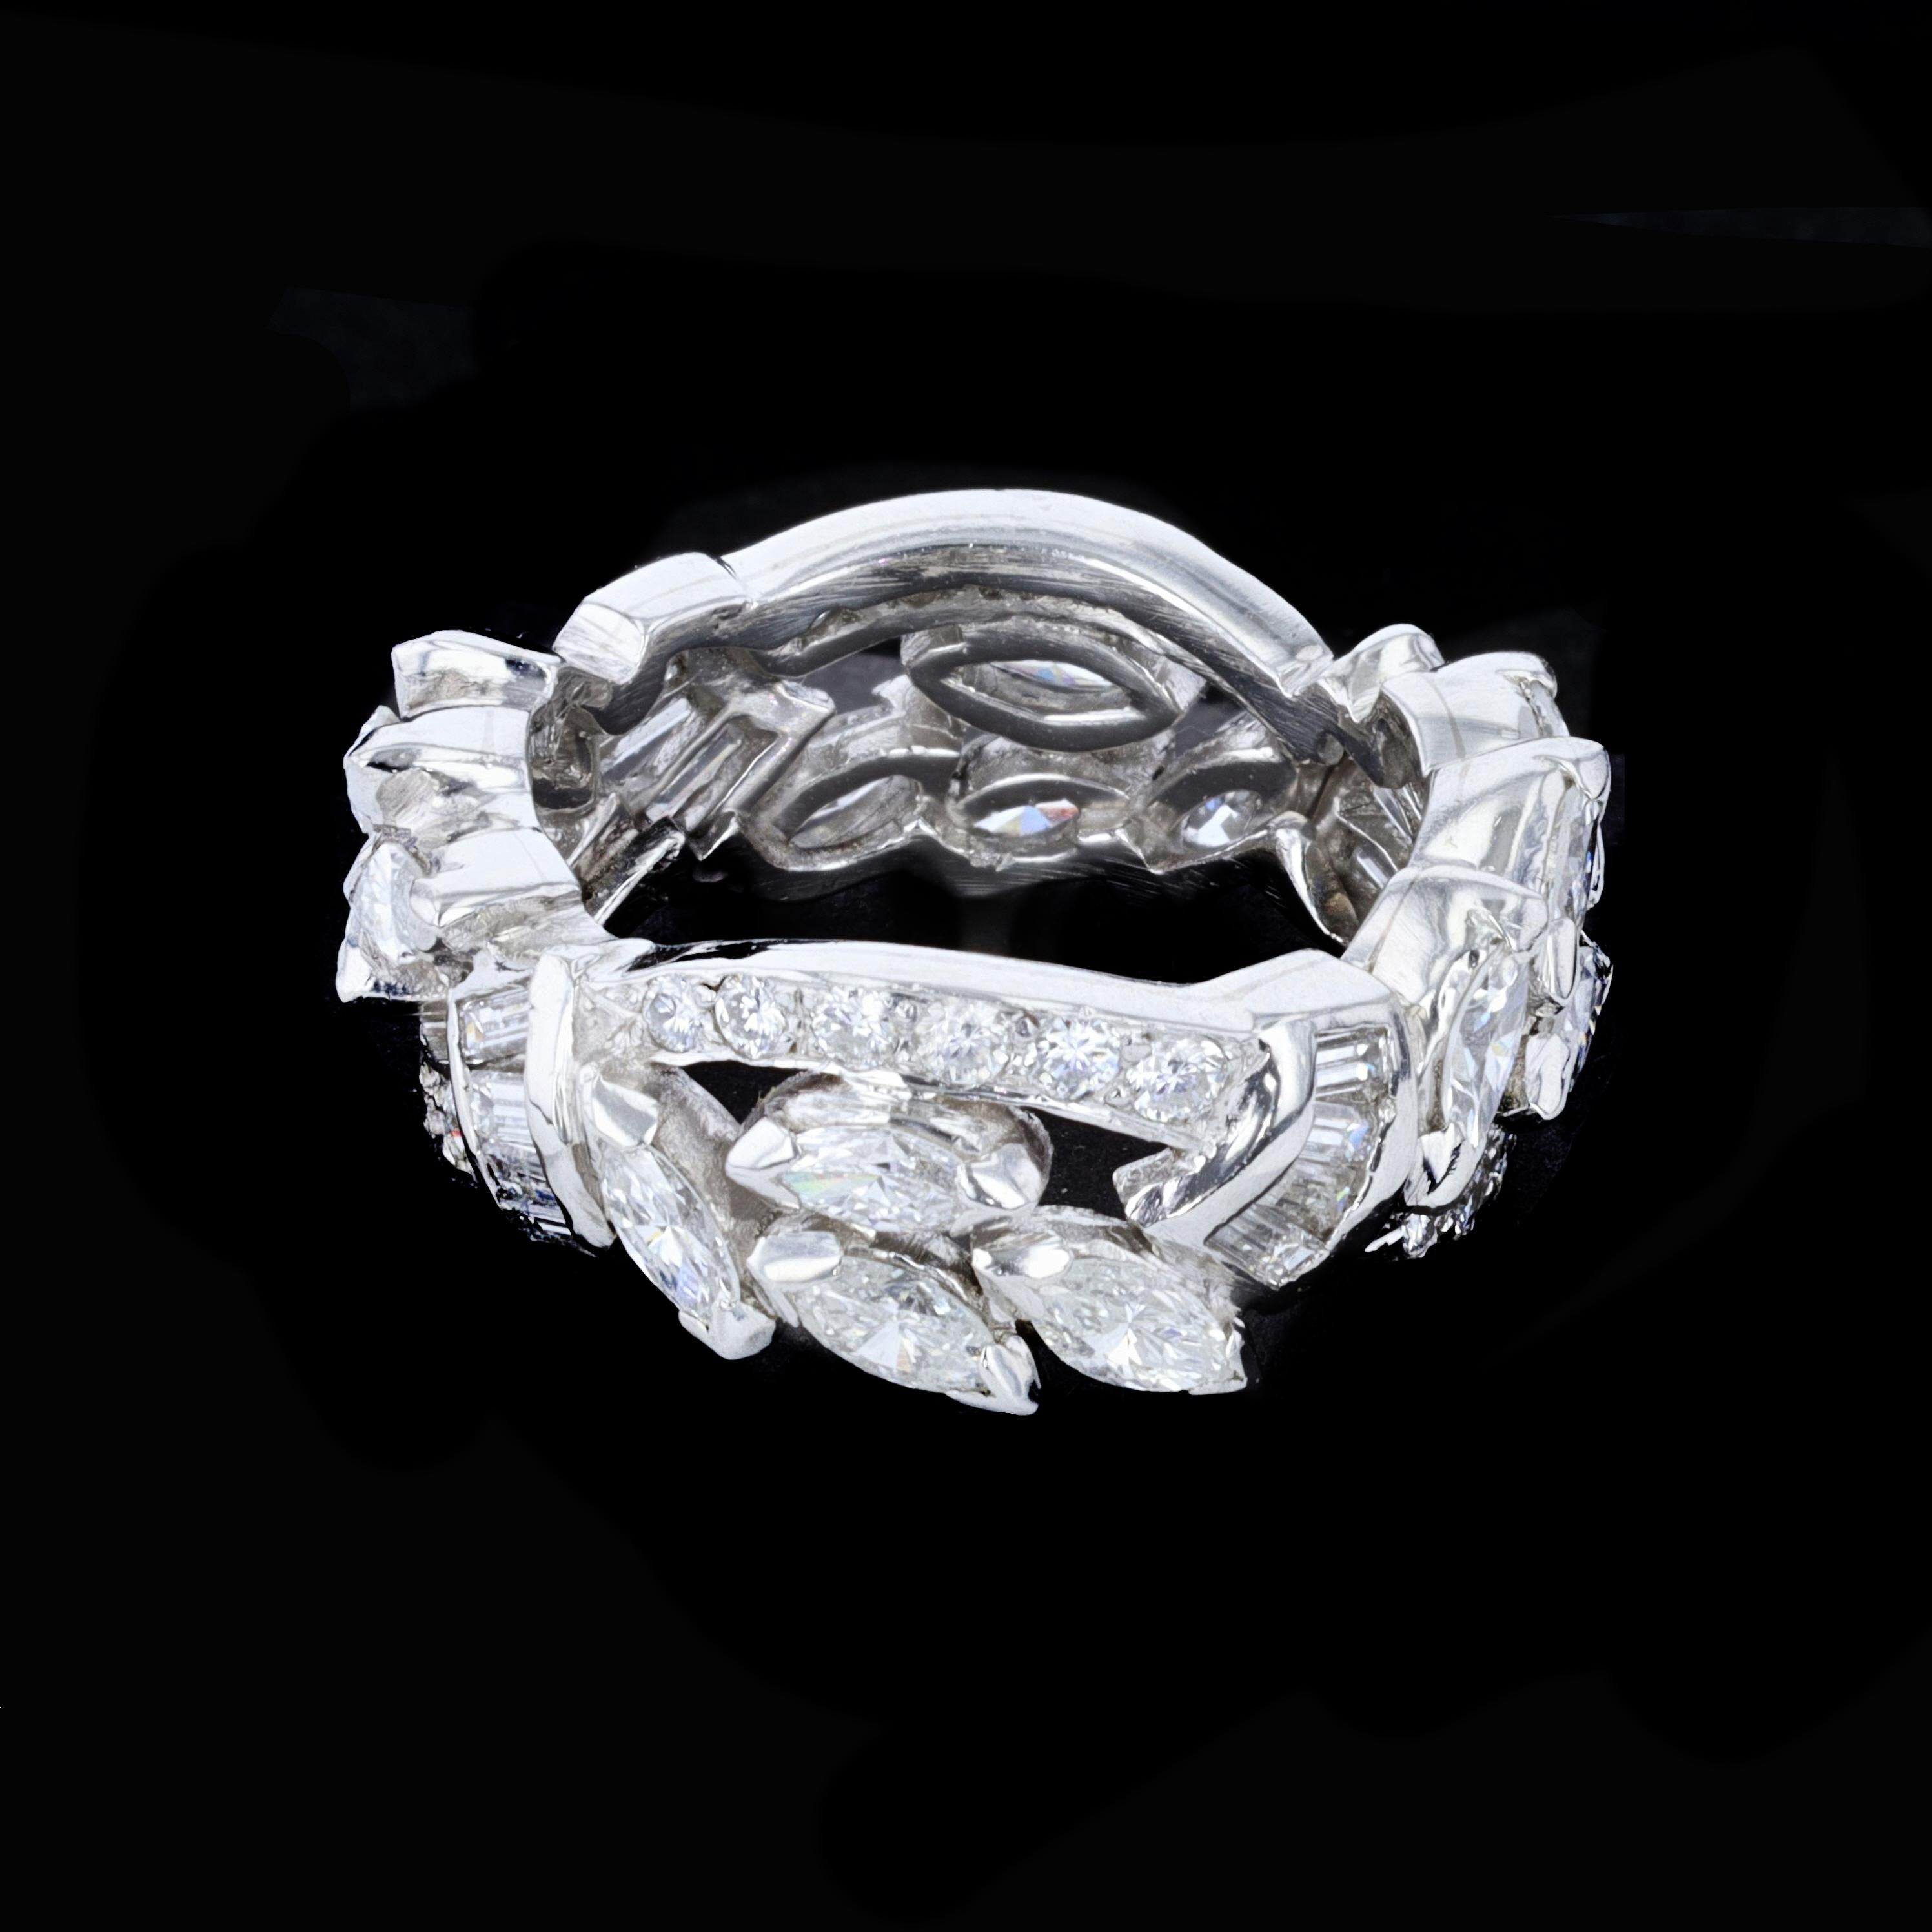 This platinum mid-century diamond full anniversary band features layers of sparkle and beauty containing 16 marquise, 16 baguette, and 24 round diamonds weighing 2.75 ctw and sized to 5 3/4.

